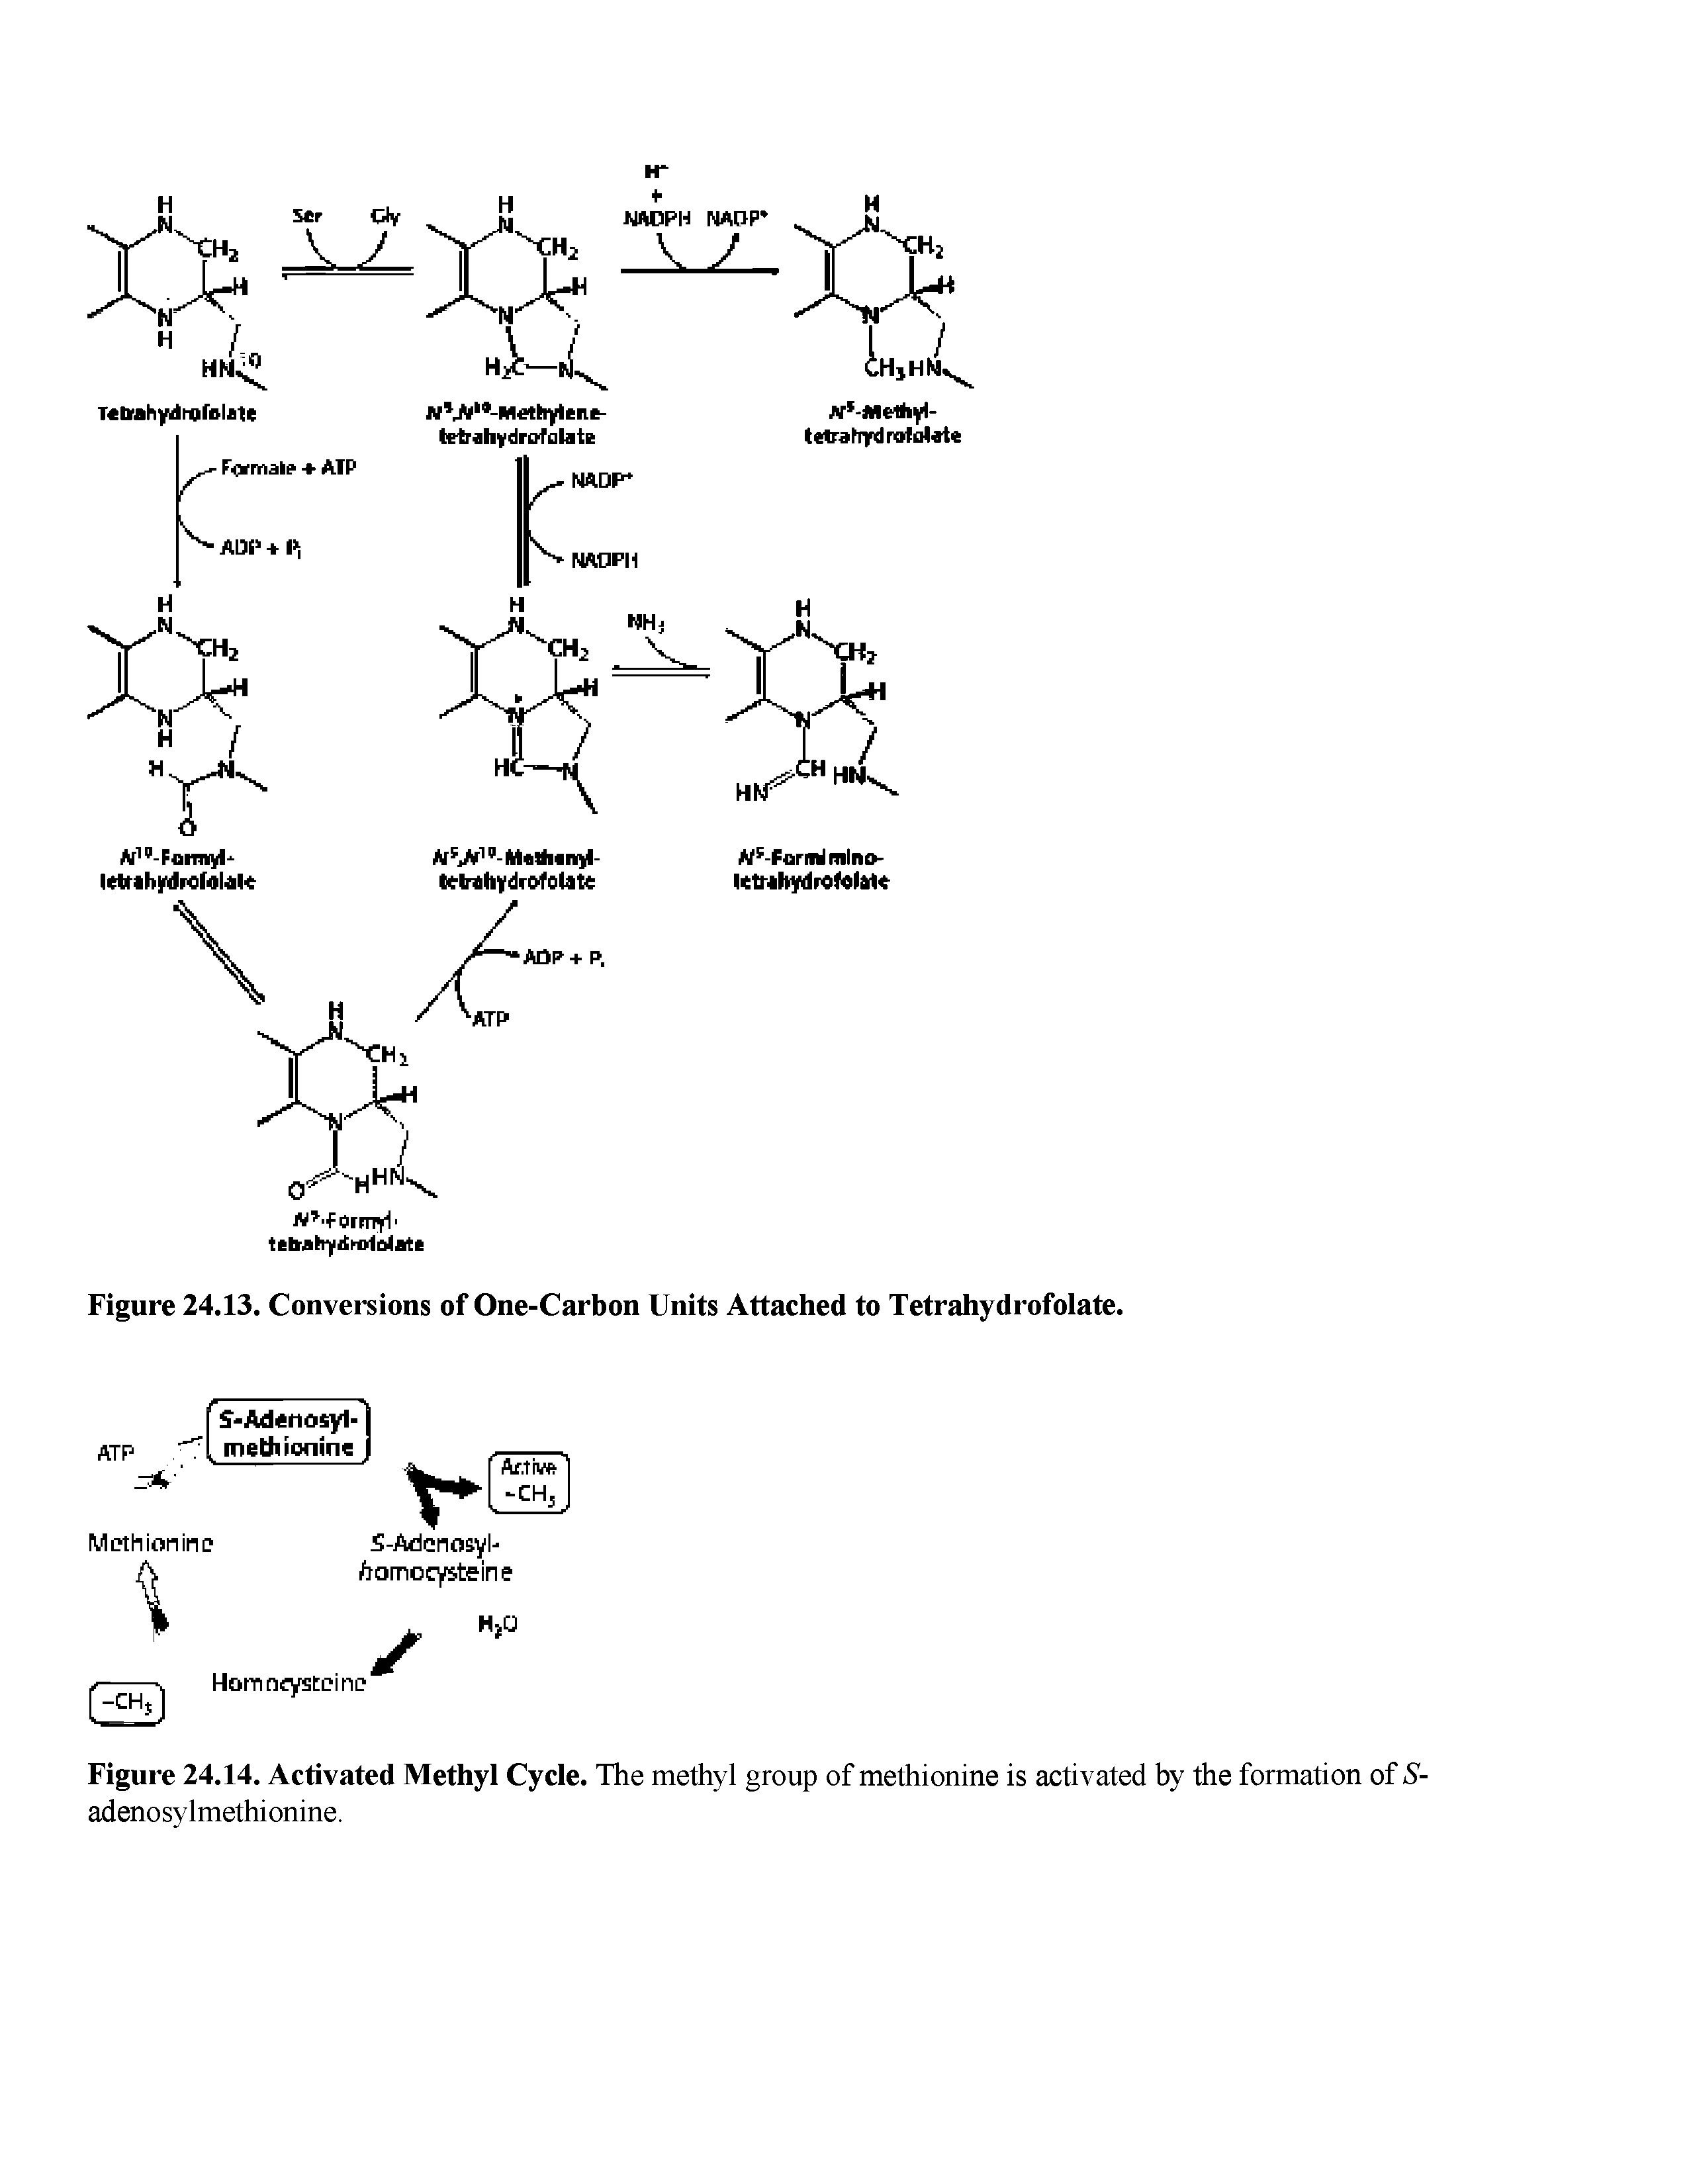 Figure 24.14. Activated Methyl Cycle. The methyl group of methionine is activated by the formation of S-adenosylmethionine.